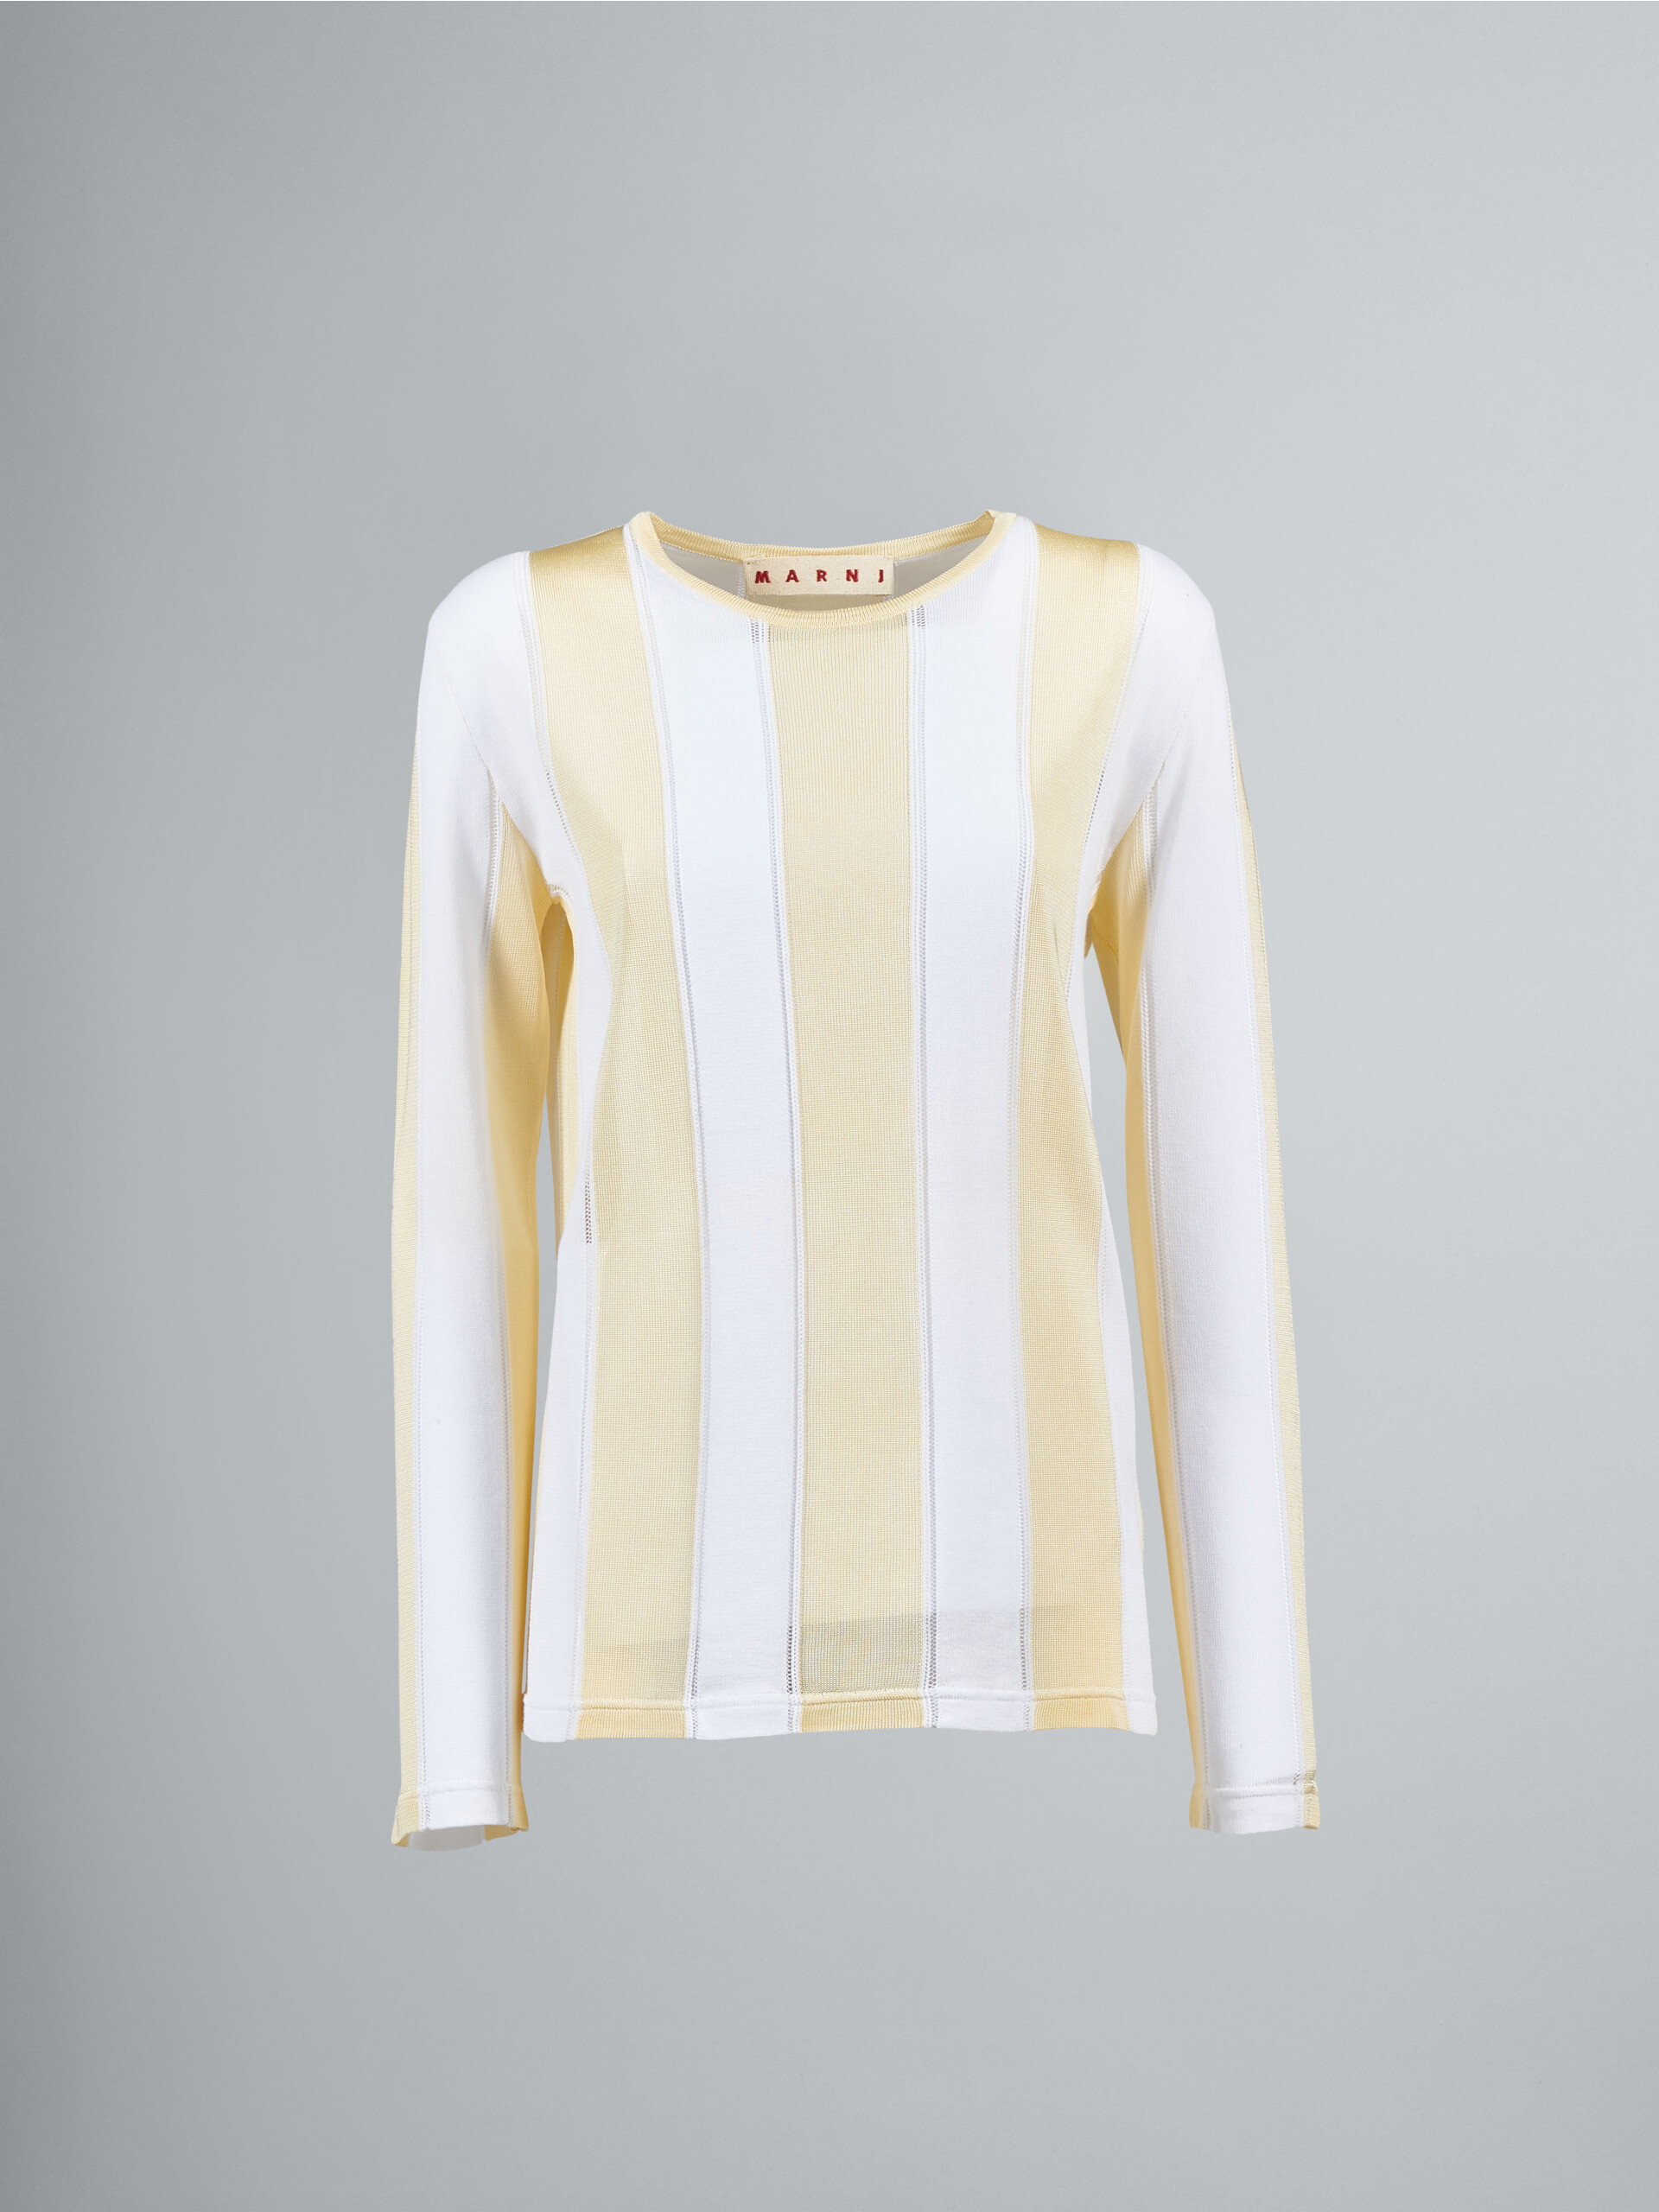 Striped cotton and viscose crewneck sweater - Pullovers - Image 1